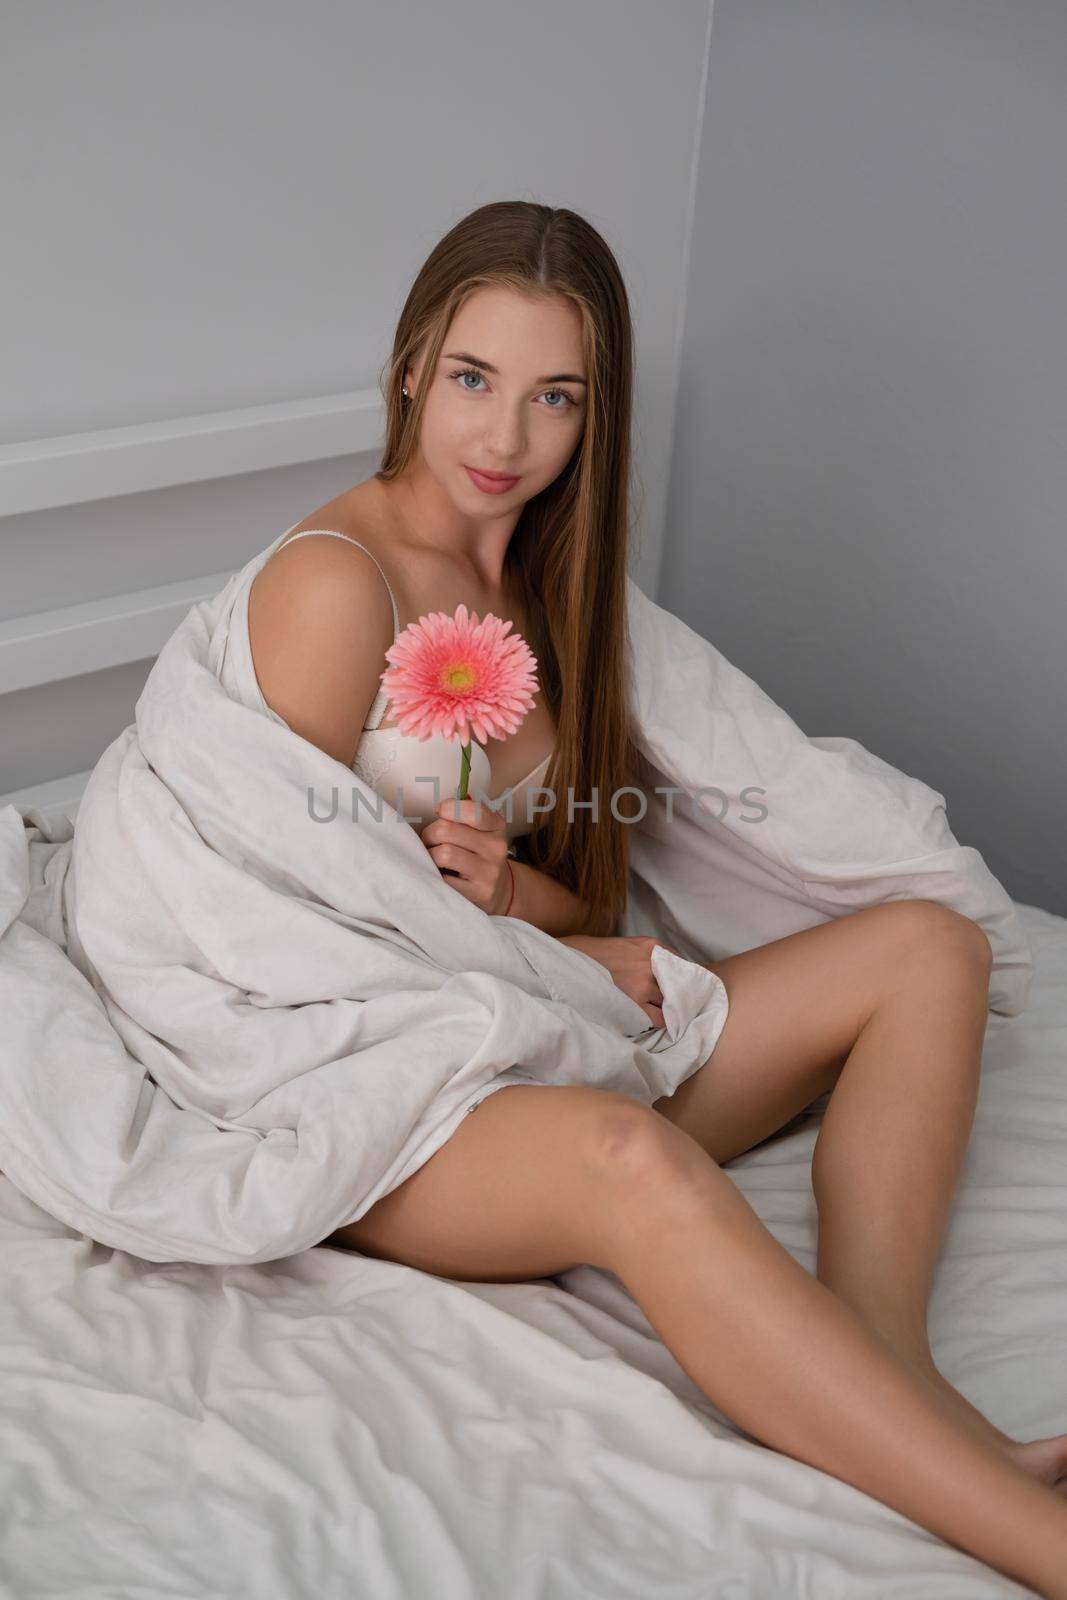 charming young woman lies in underwear on comfortable bed. holding red pink flower. tender portrait of a girl in a hotel room or home. Lovely female enjoy good relaxation. Morning time.